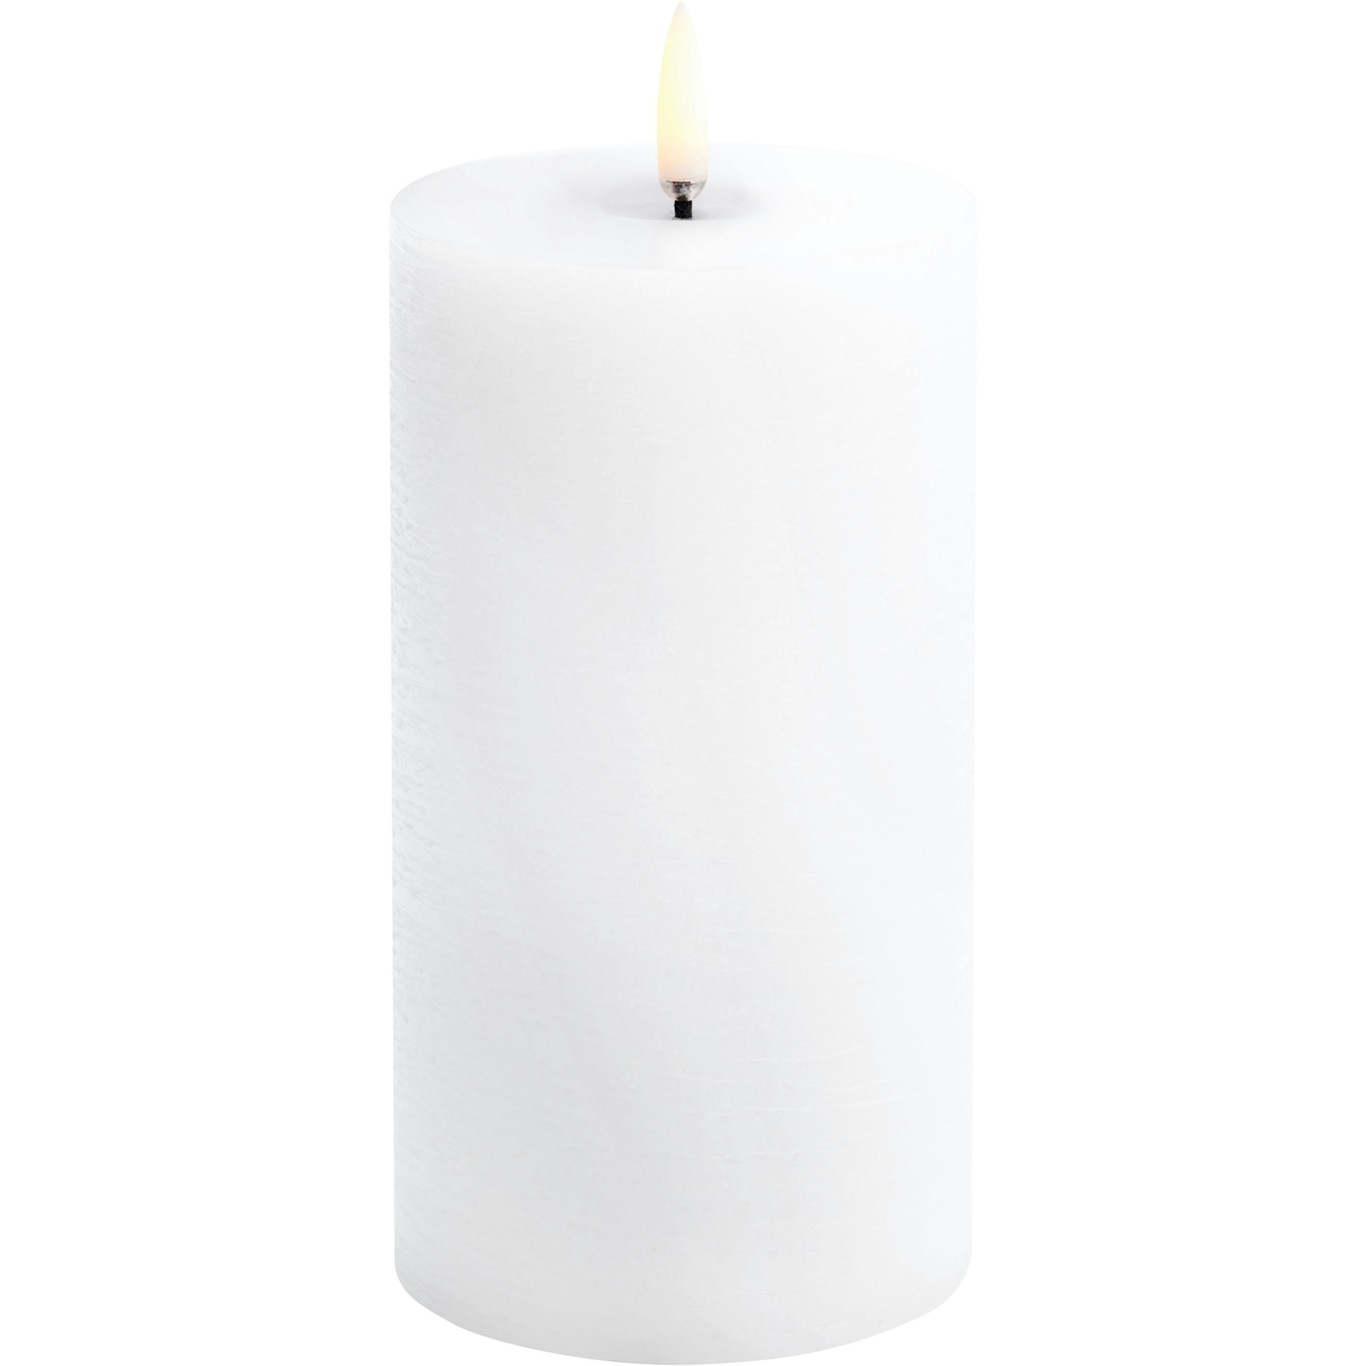 LED Pillar Candle Melted 7,8x15,2 cm, Nordic White